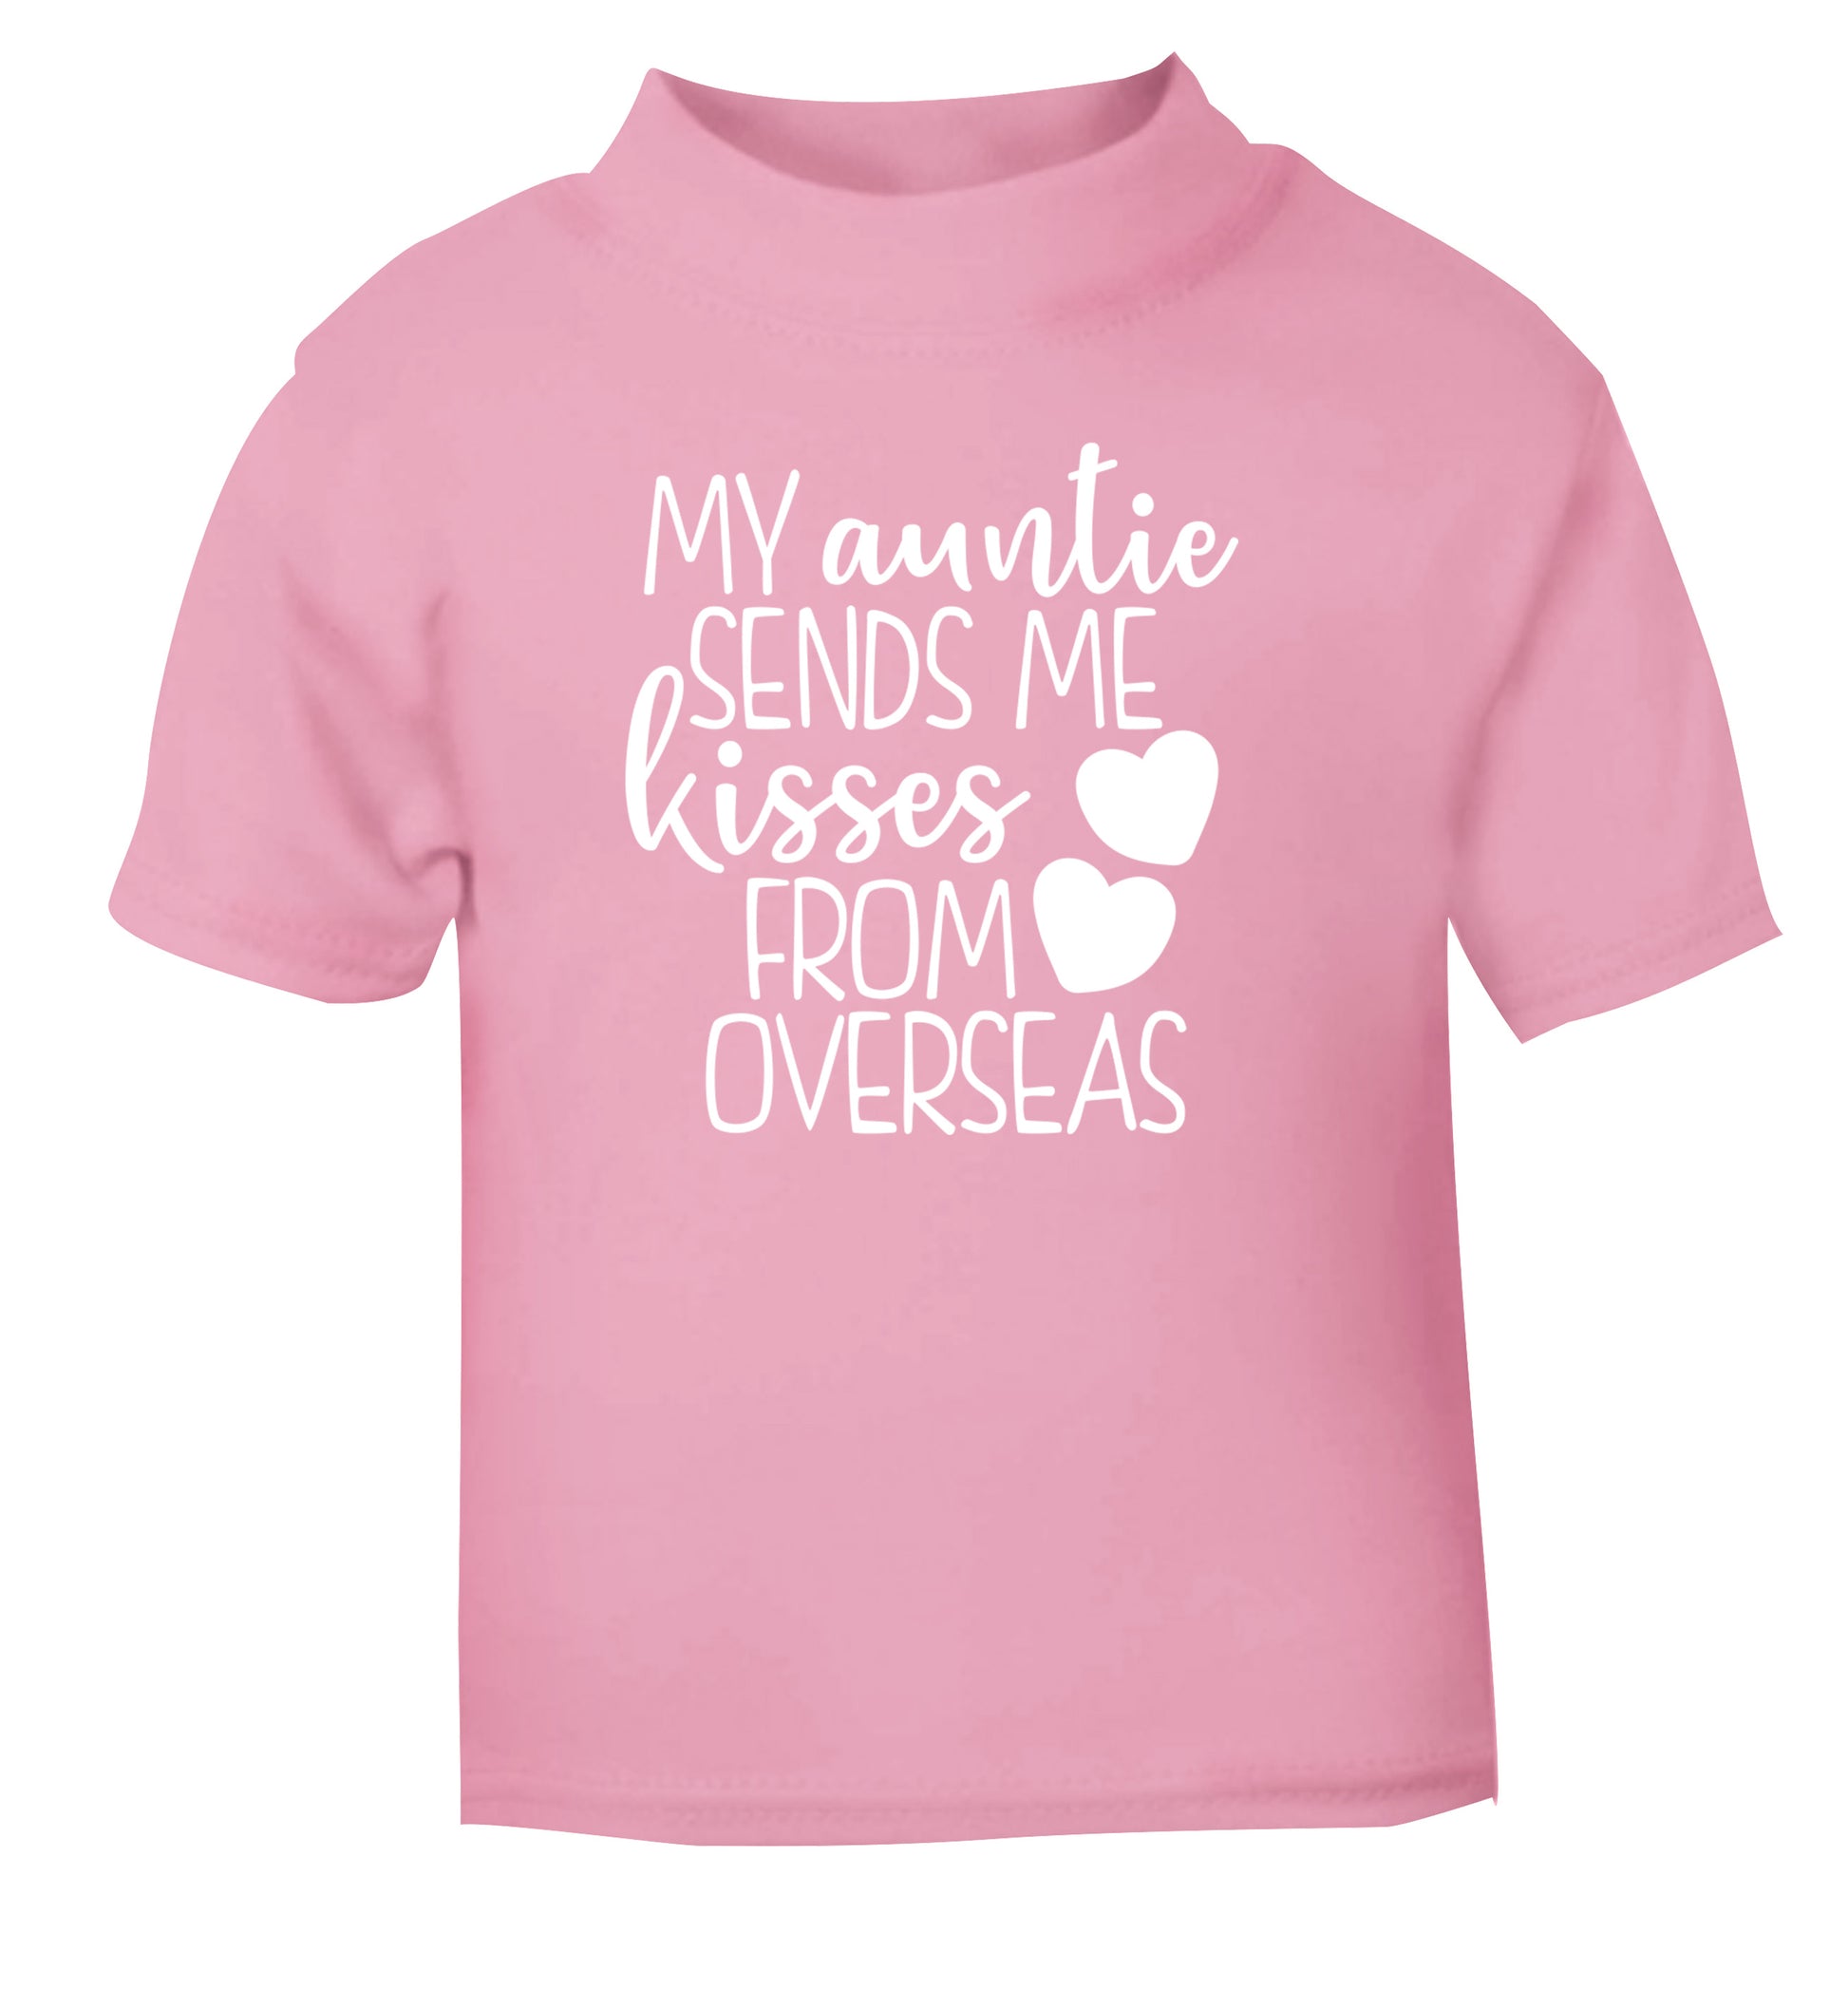 My auntie sends me kisses from overseas light pink Baby Toddler Tshirt 2 Years